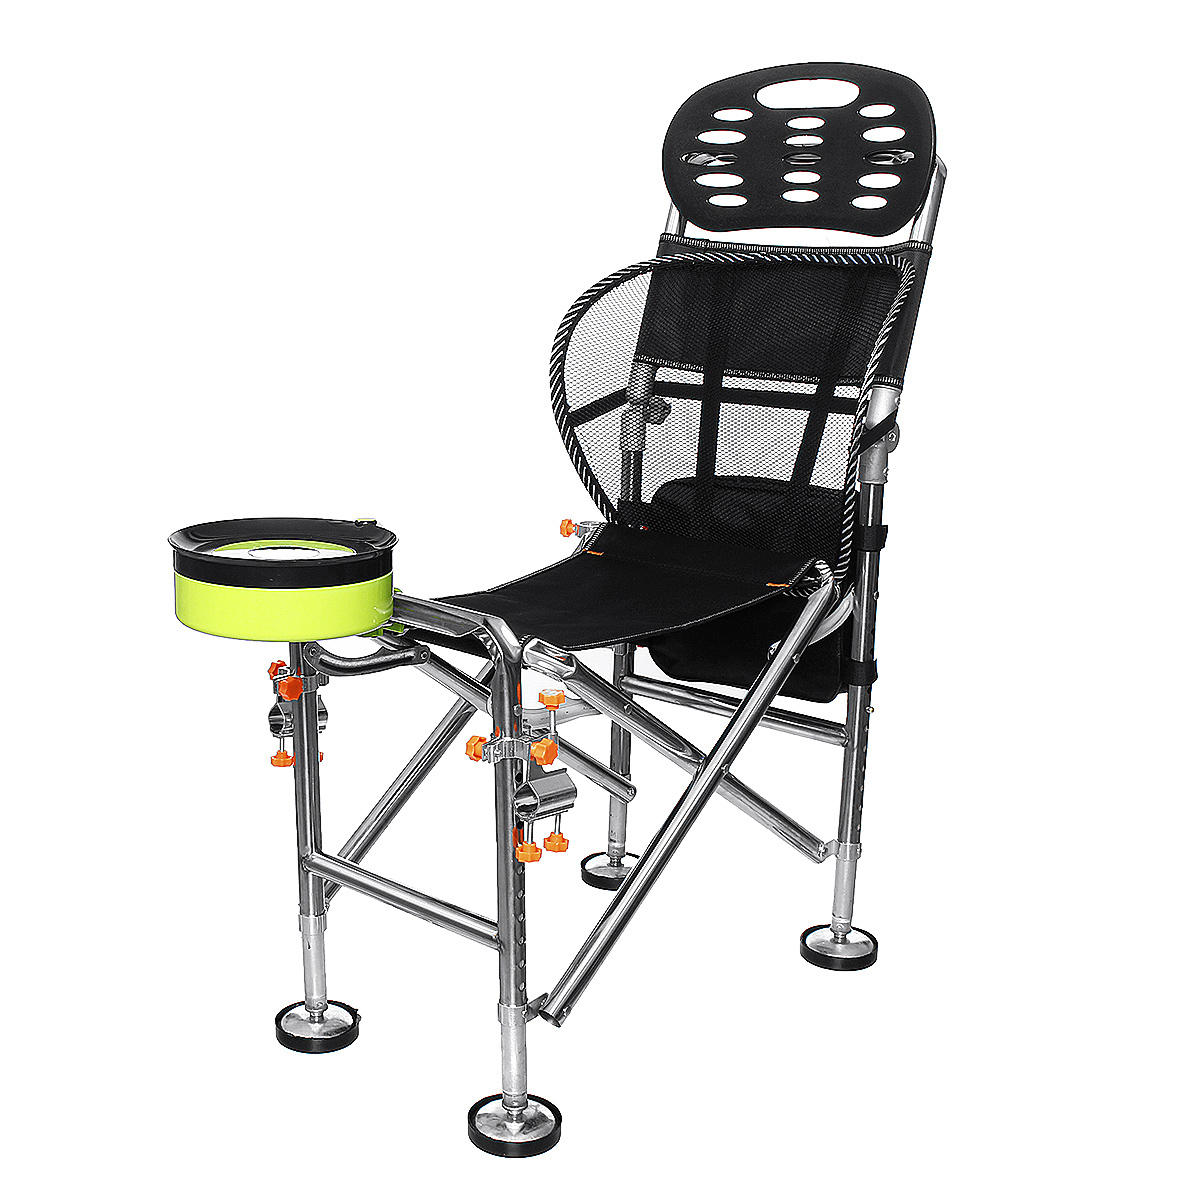 Outdoor Portable Folding Chair Stainless Steel Fishing Seat Stool Adjustable Liftable 22cm Camping BBQ